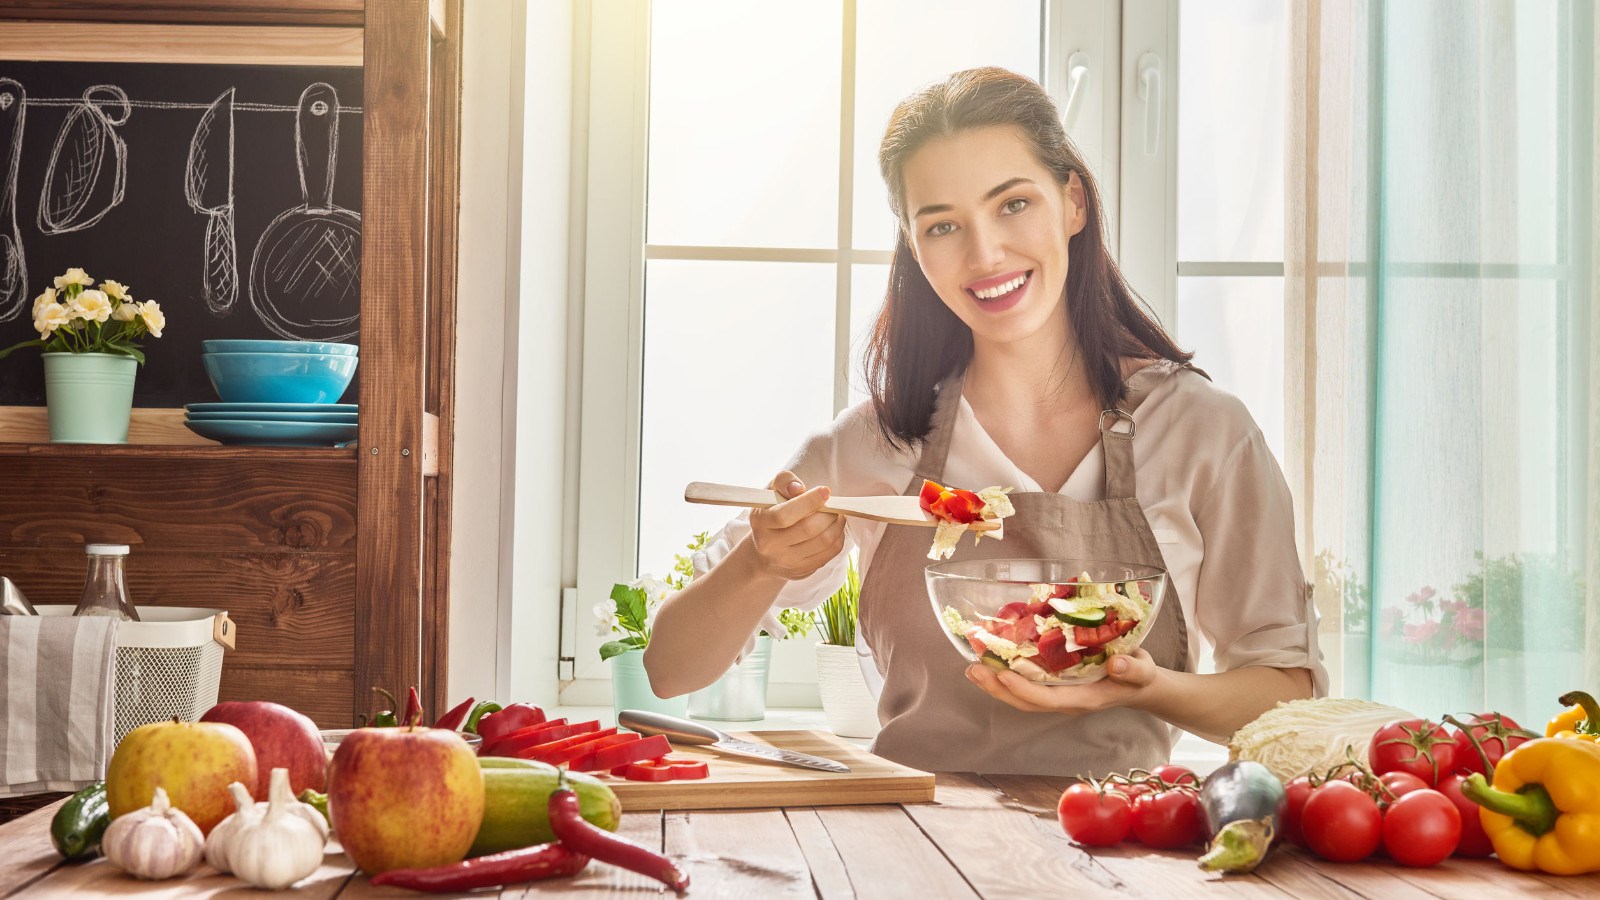 Are You American, Australian, British, Or Canadian When It Comes to Eating? Woman Serving Cooking Eating Vegetables Salad Healthy